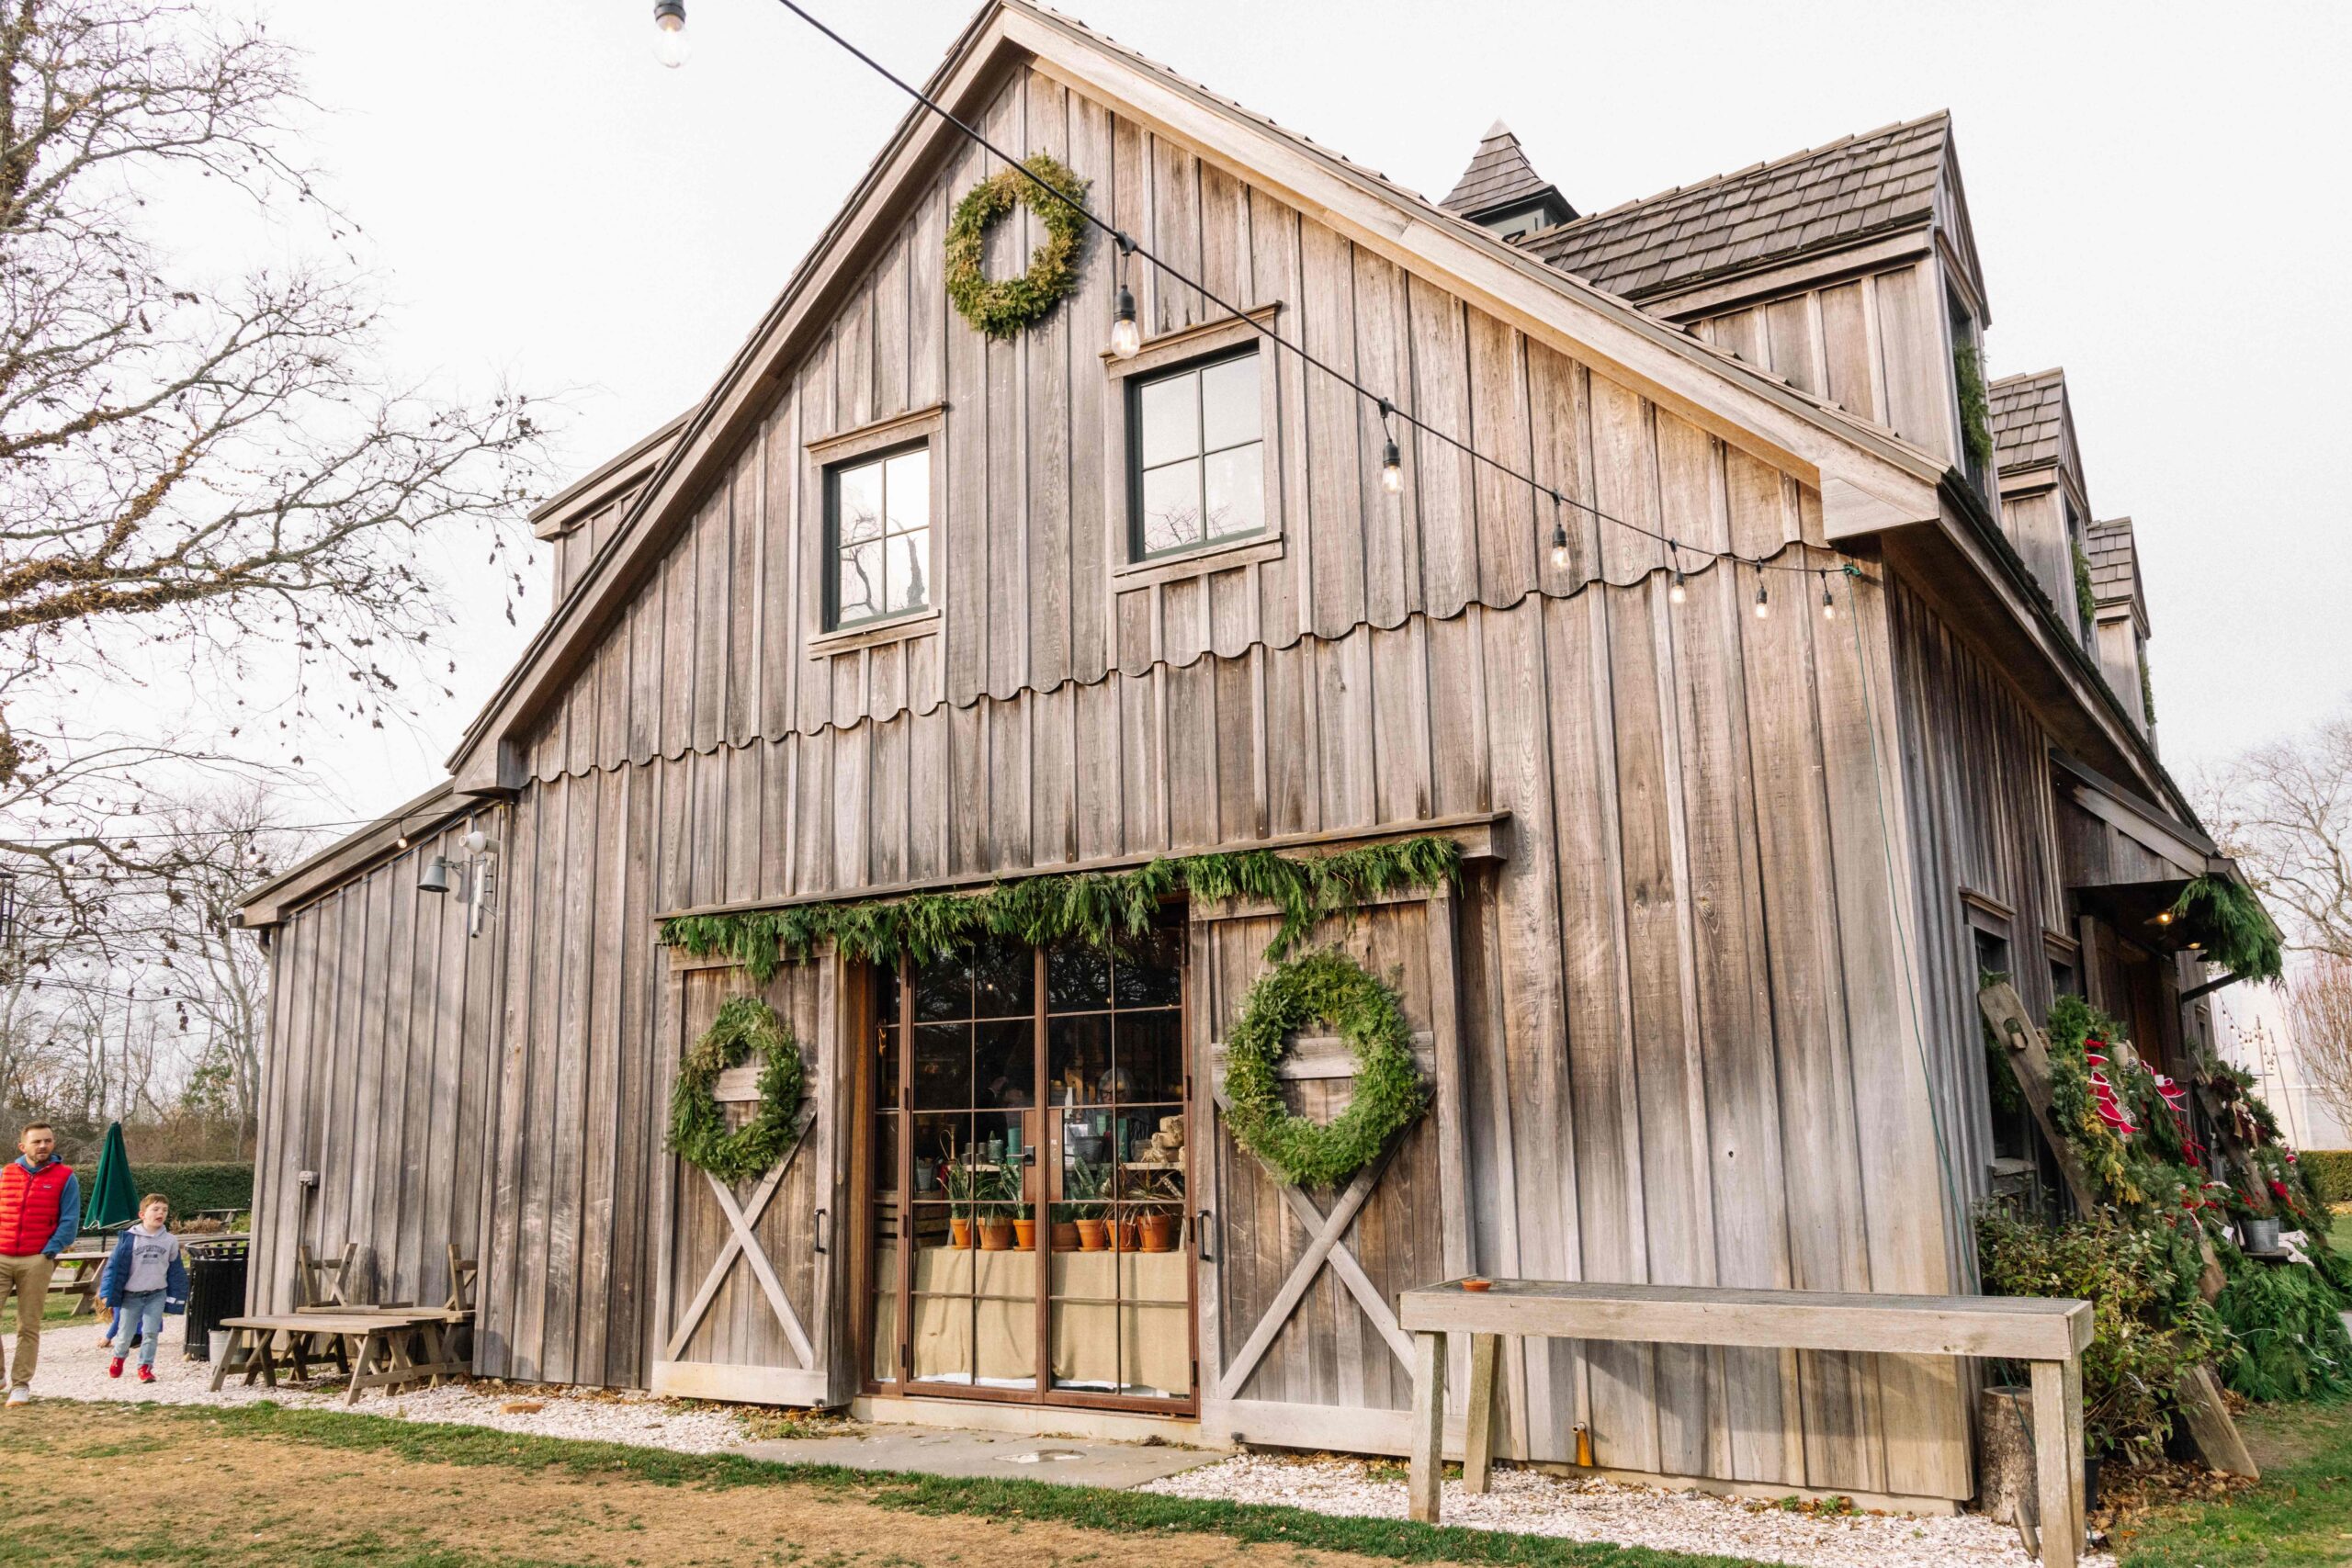 Beach Plum Farmhouse with green wreaths hung on the doors and lights strung up